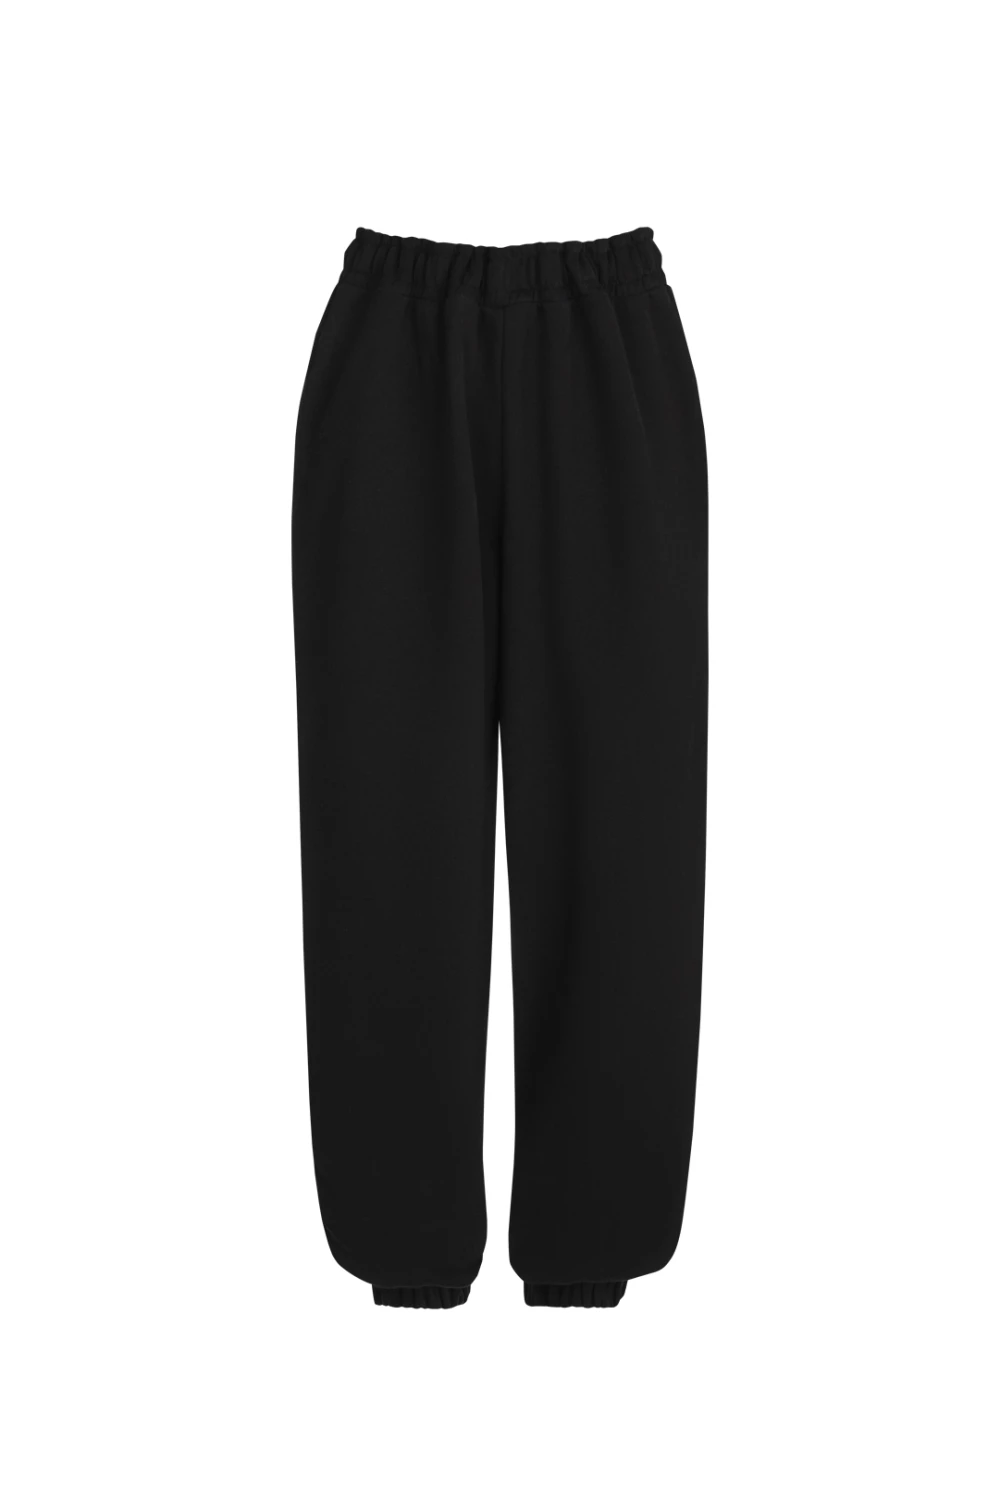 pants "groove" in black color